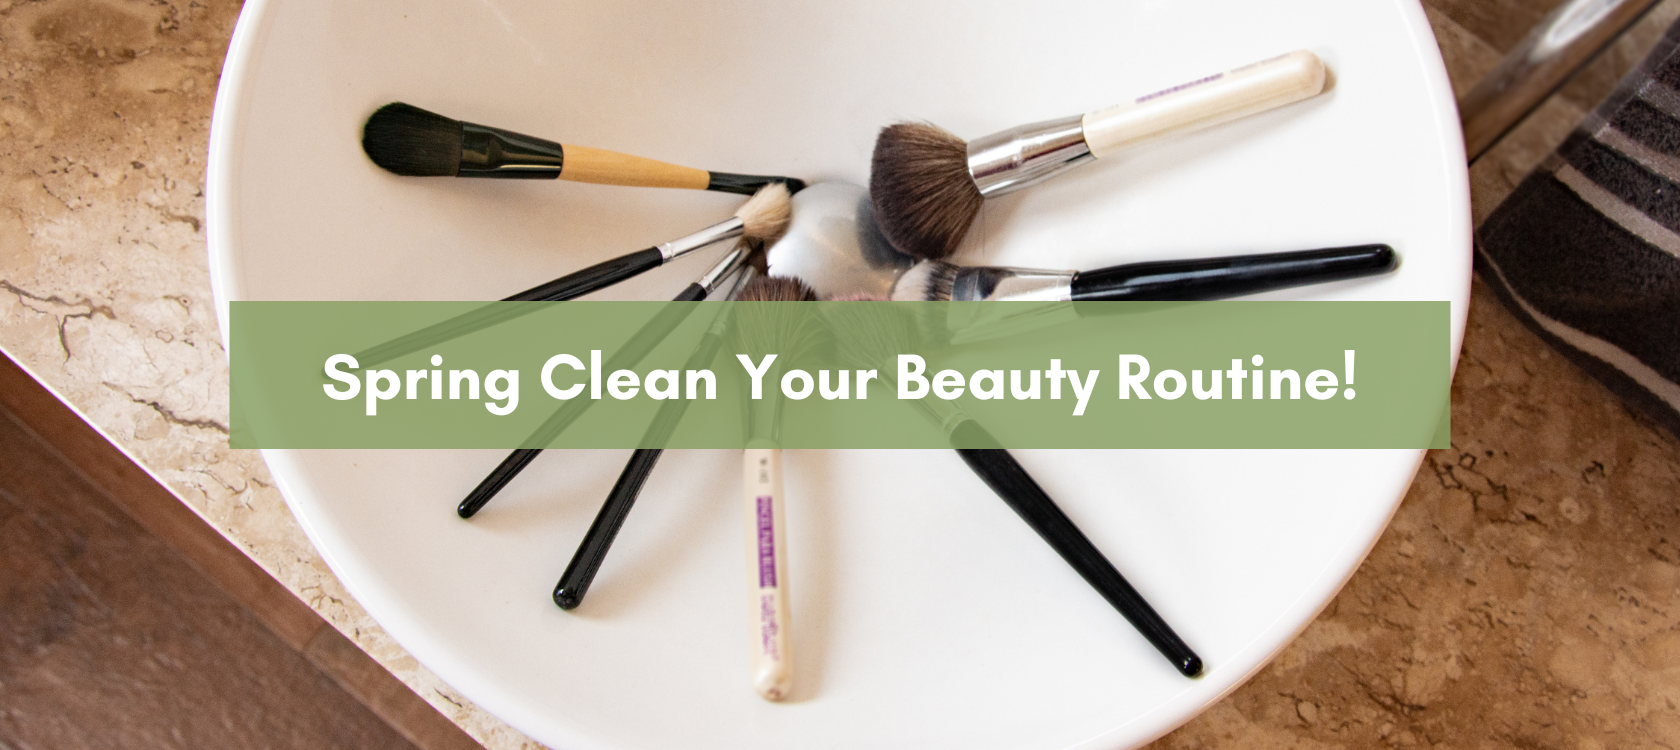 Spring Clean Your Beauty Routine!